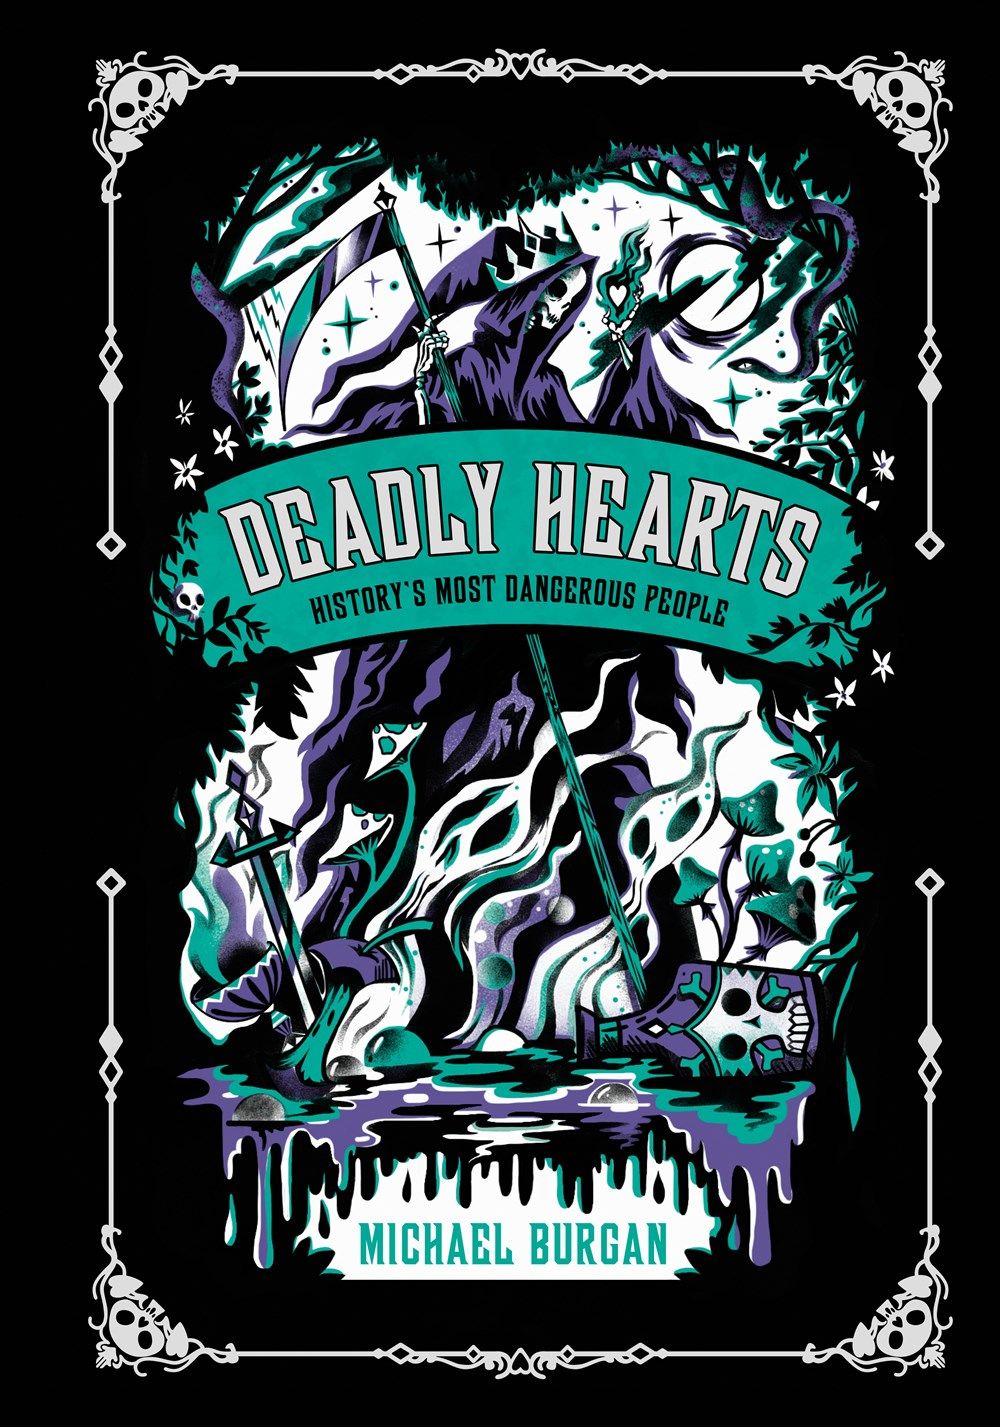 Cover of Deadly Hearts by Burgan